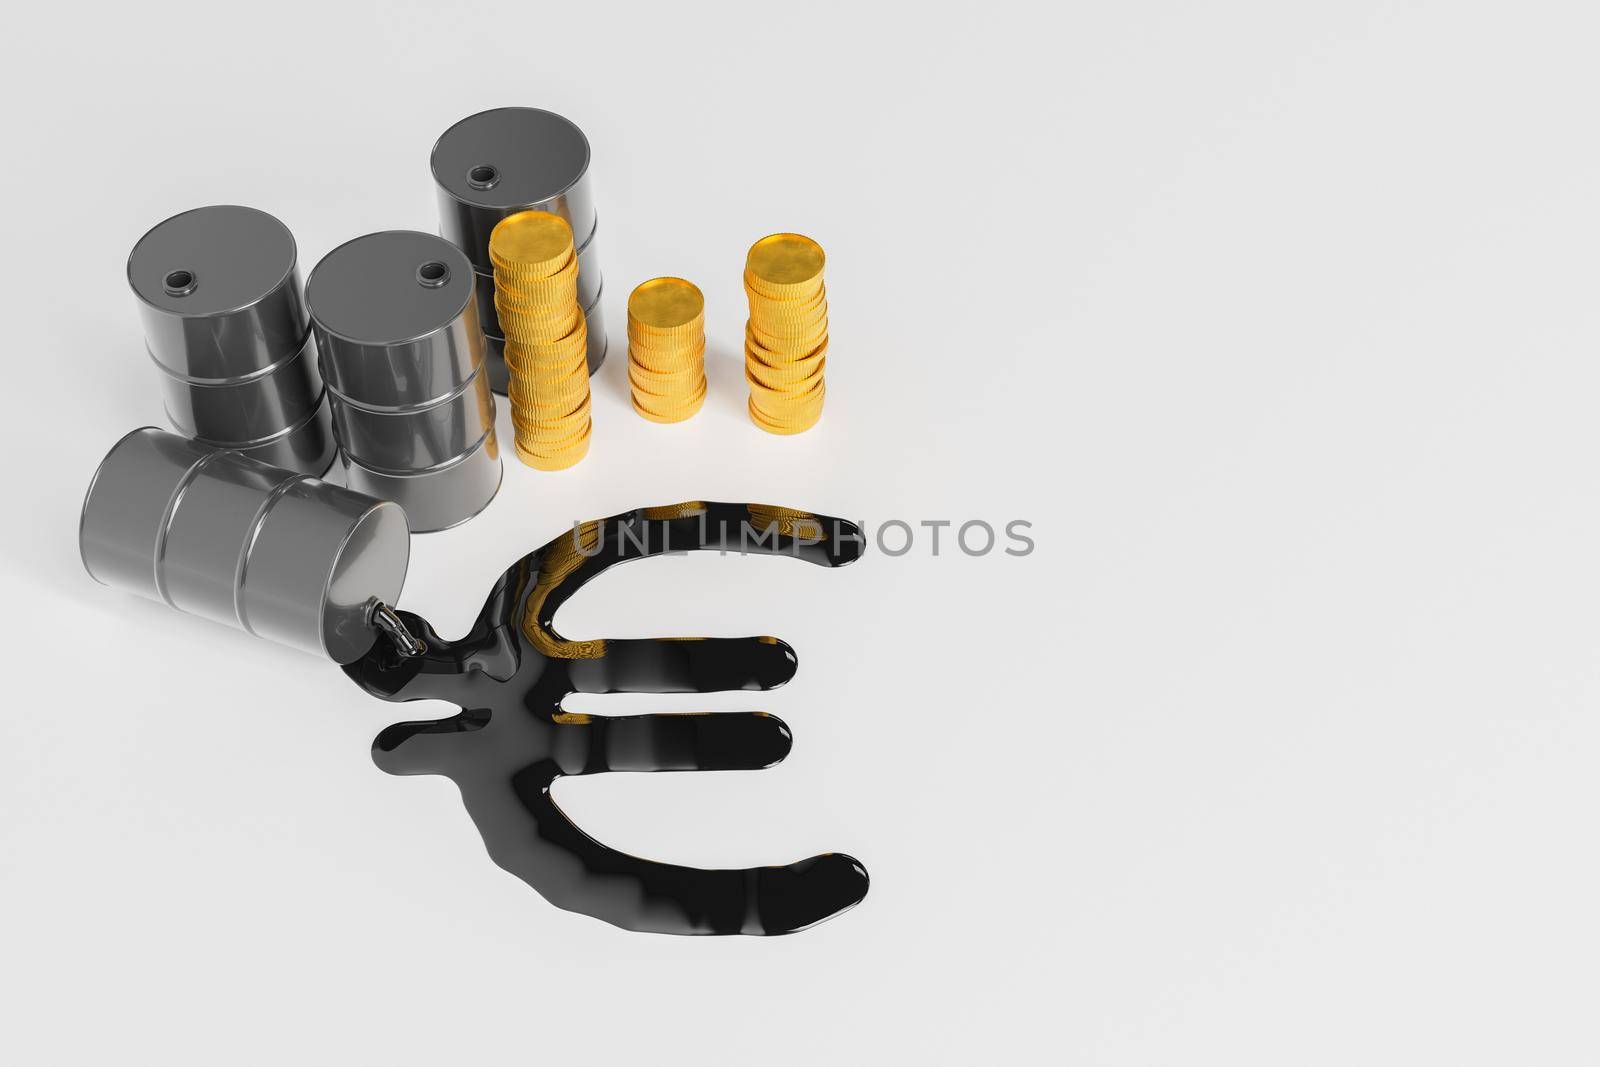 Oil barrels and coins near euro symbol by asolano